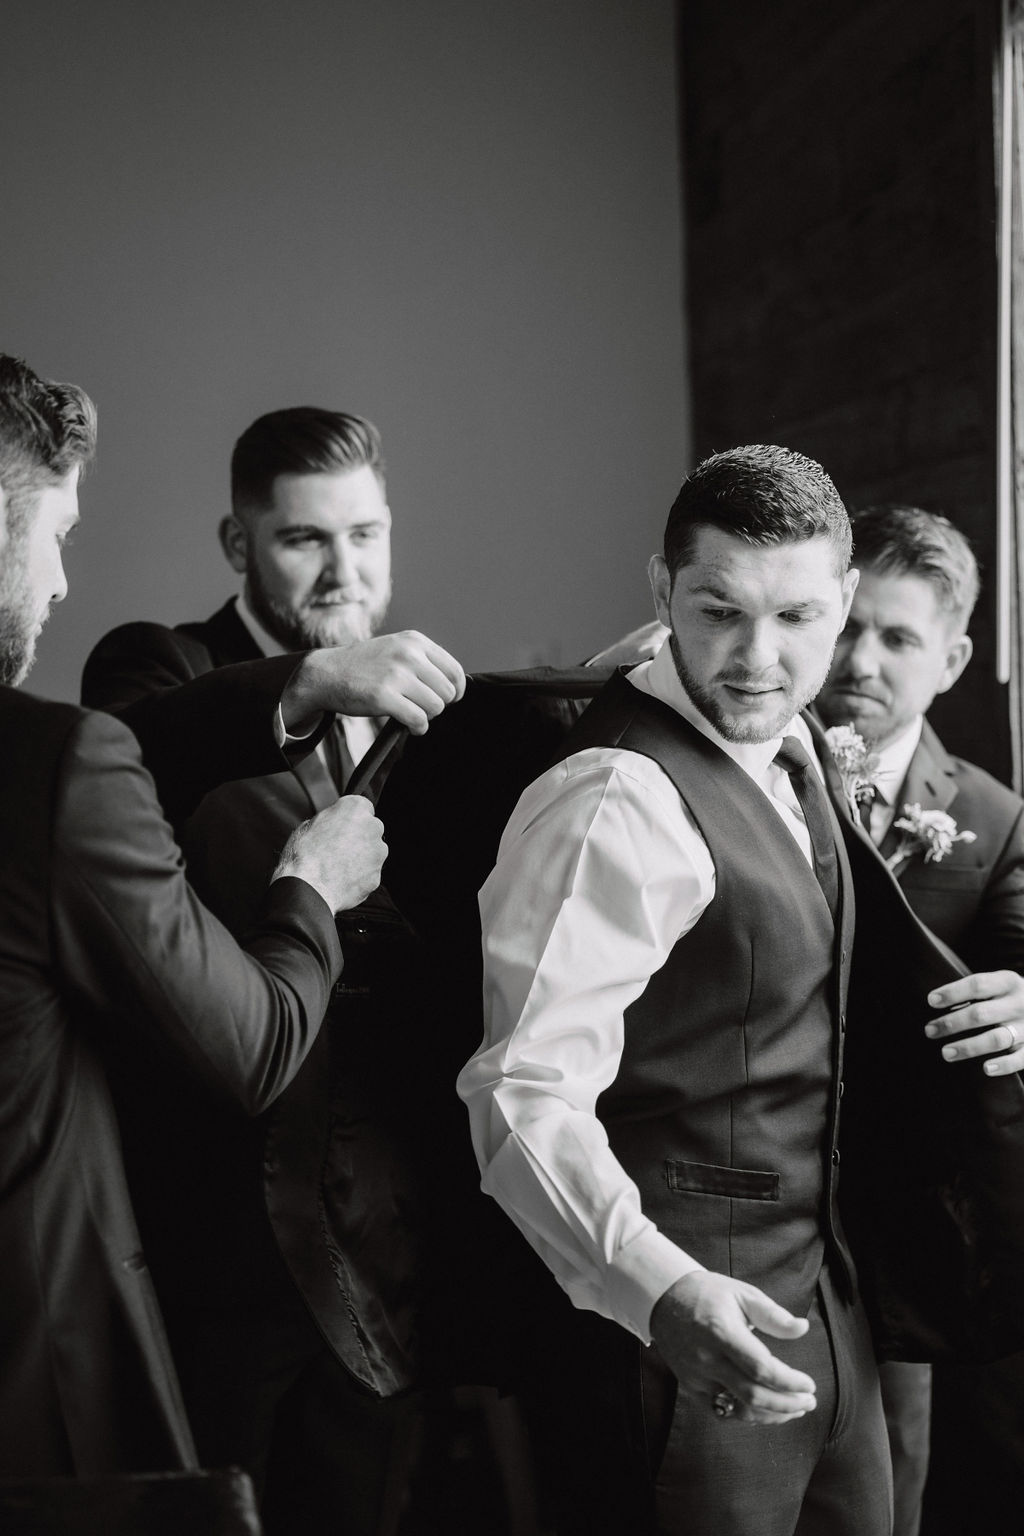 Four men, wearing formal suits, assist a groom in putting on his jacket. The atmosphere appears to be a preparation for a wedding